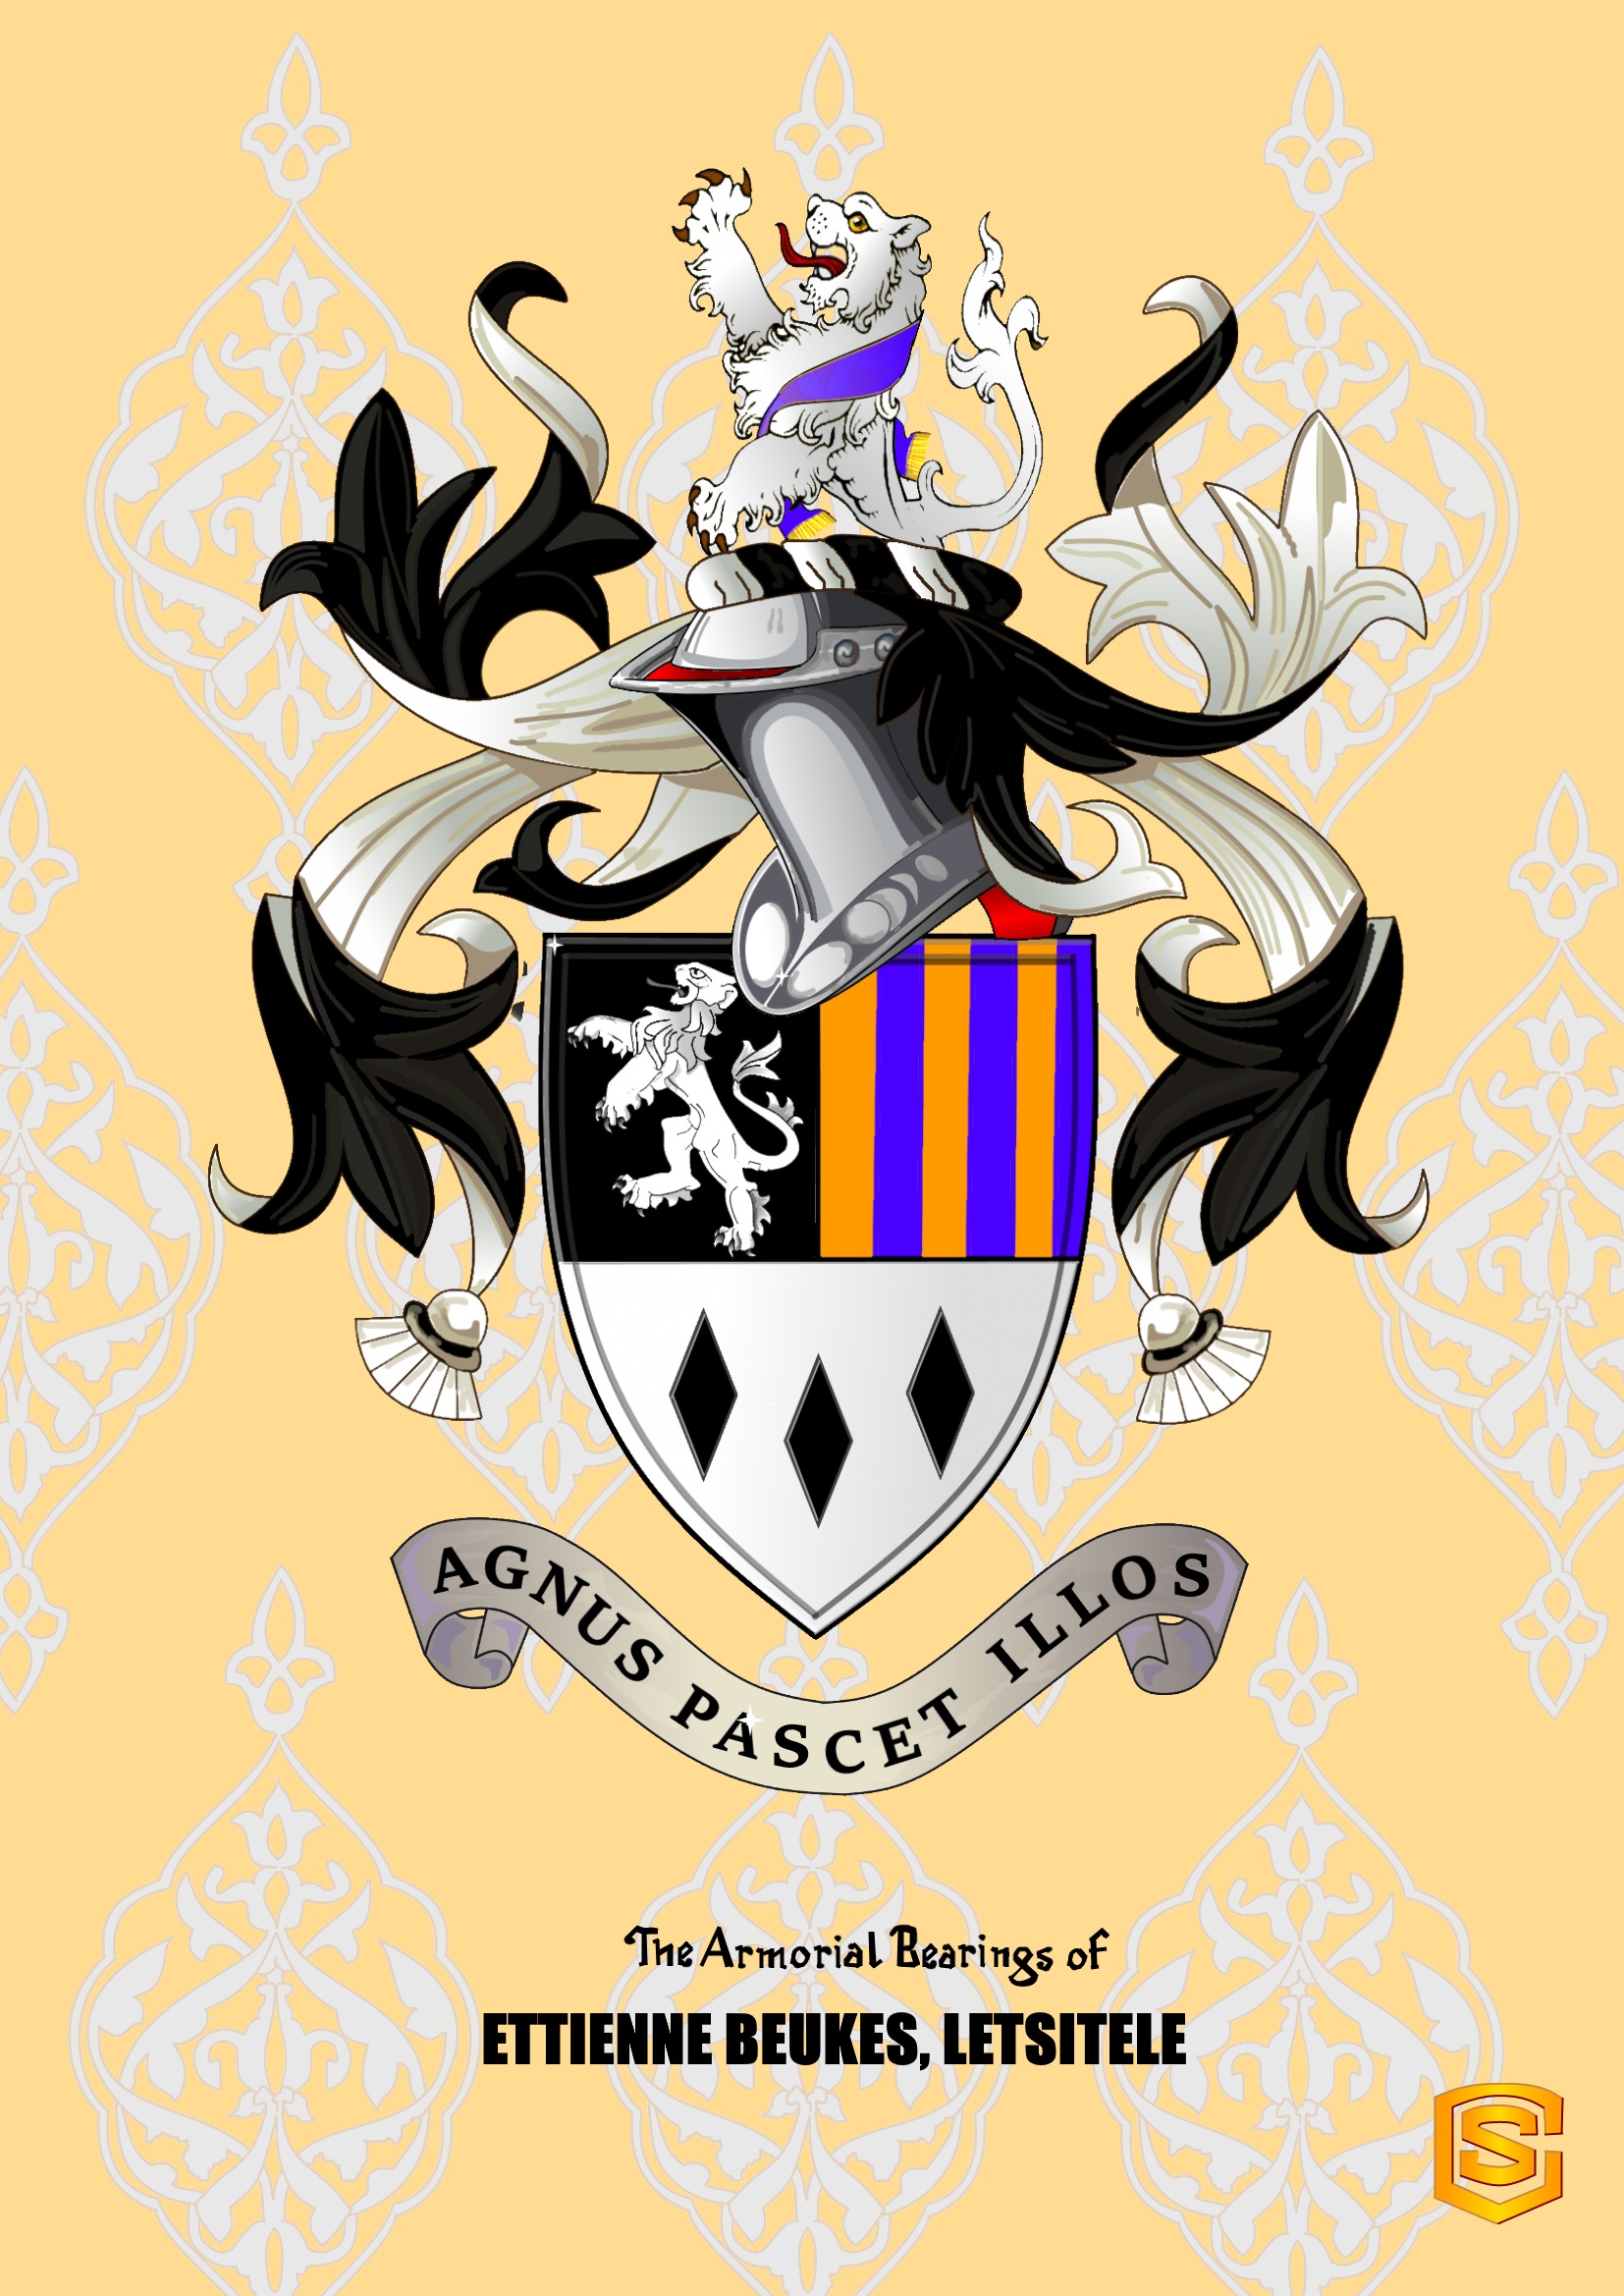 Is there anyone willing to blazon this for me please?